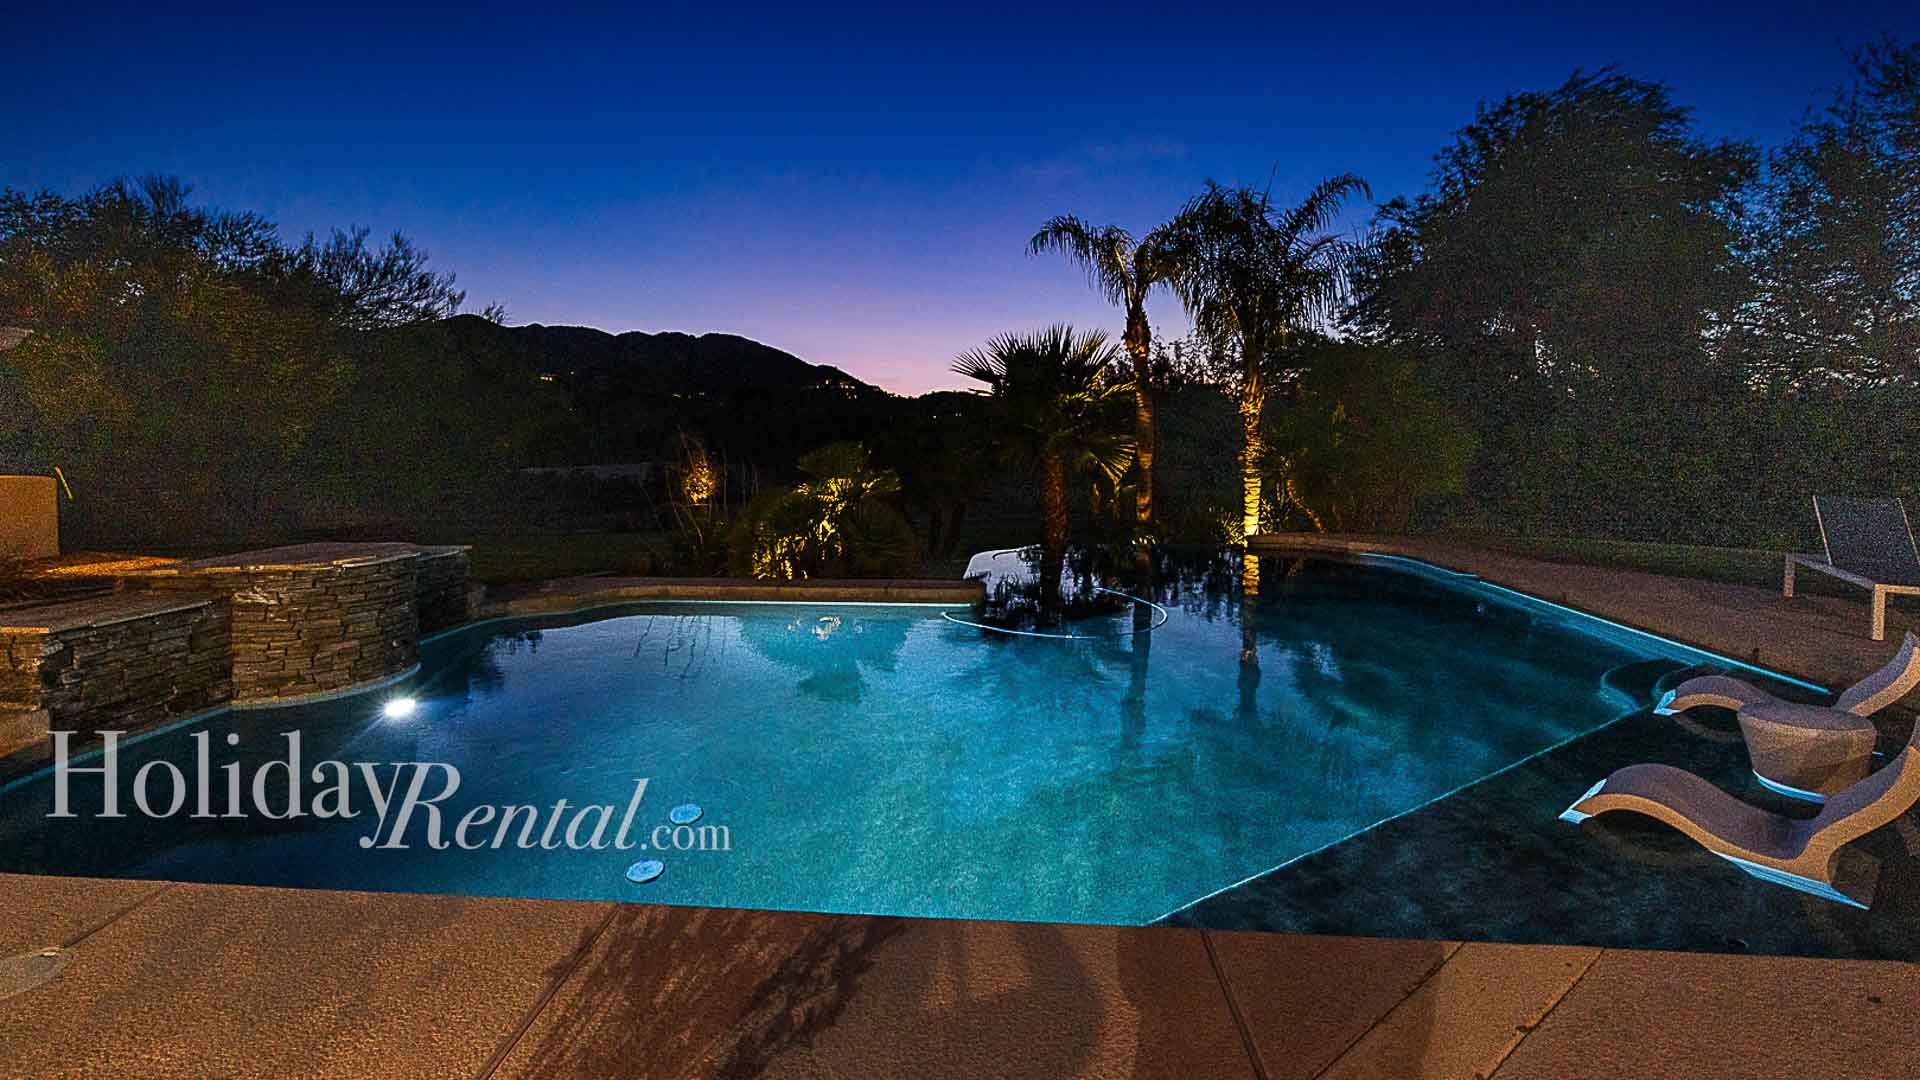 Breathtaking mountain and palm tree views from the pool at nighttime.